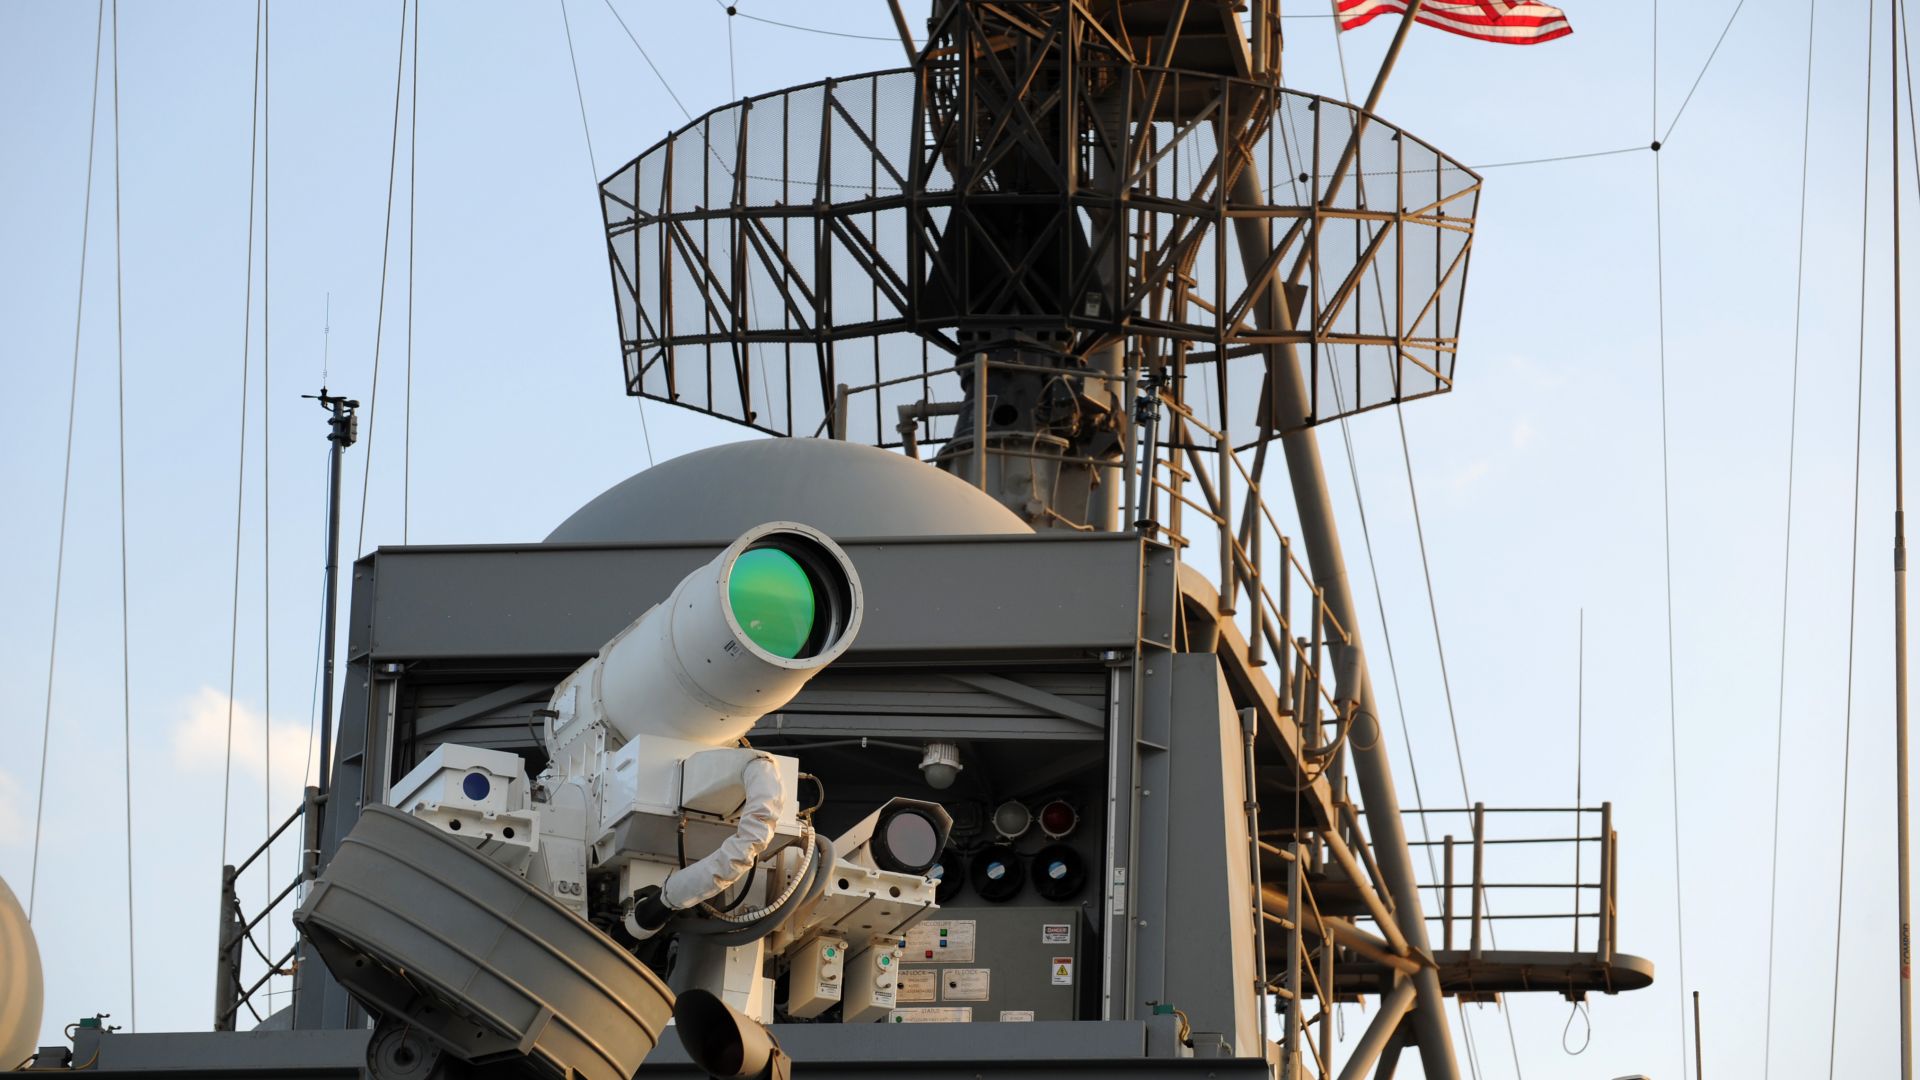 Laser Weapon System, LAWs, USA Army, United States Navy (horizontal)